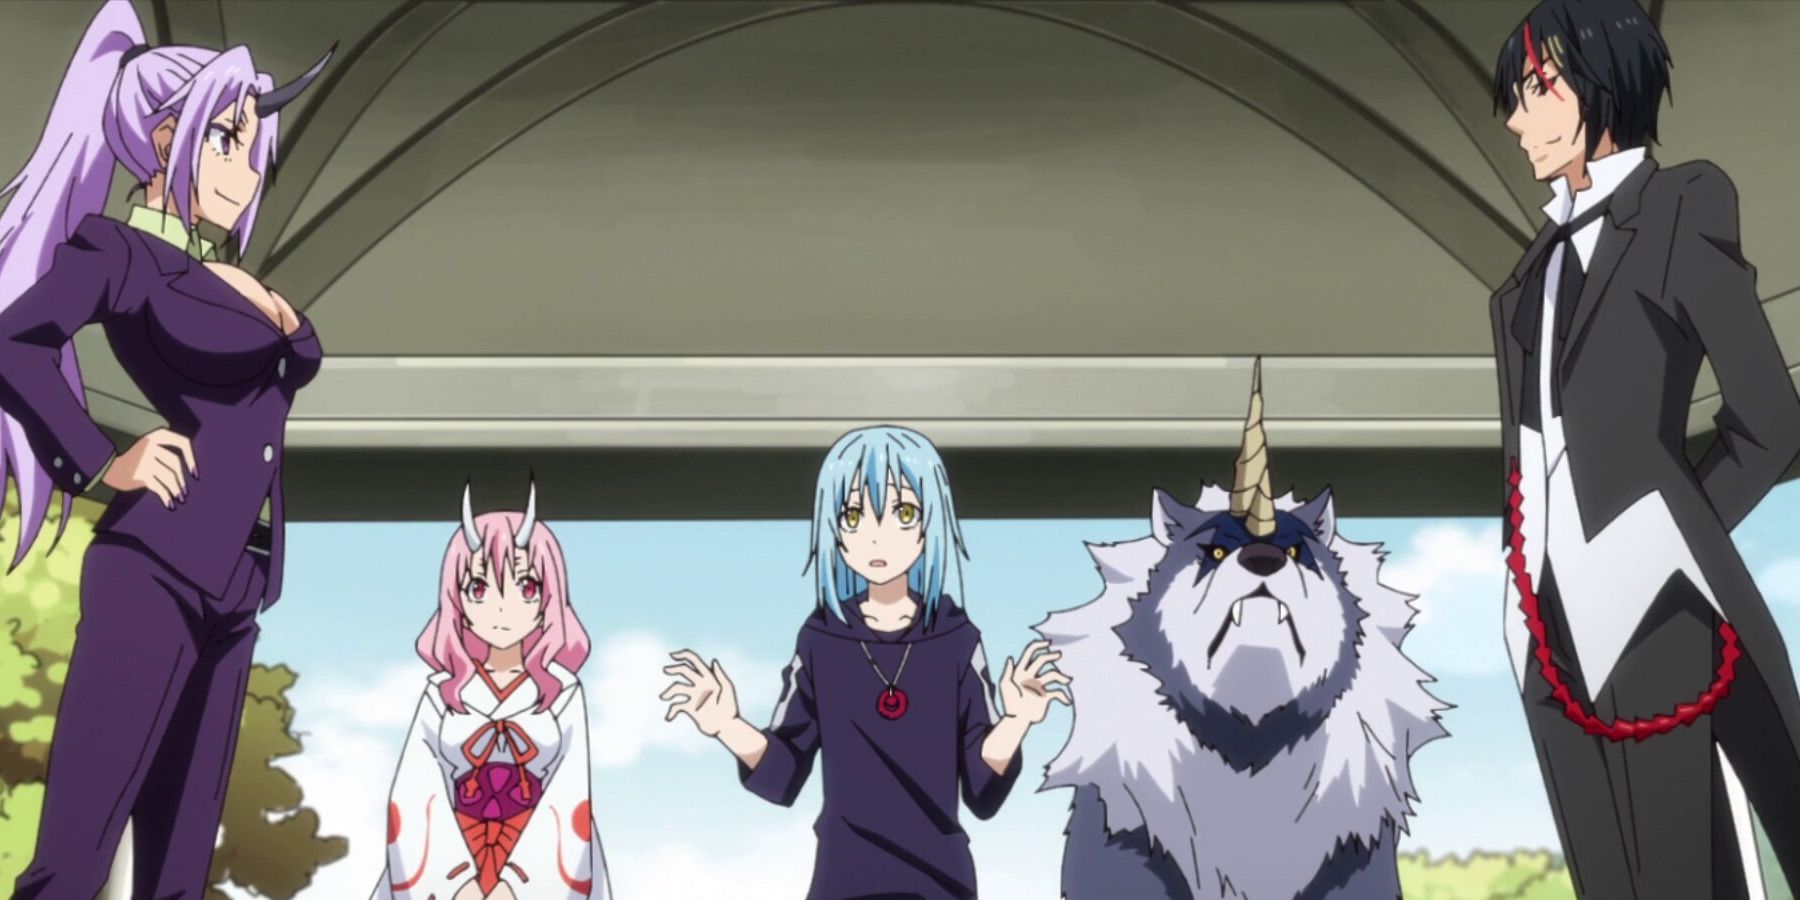 The main characters standing in That Time I Got Reincarnated as a Slime Season 2 